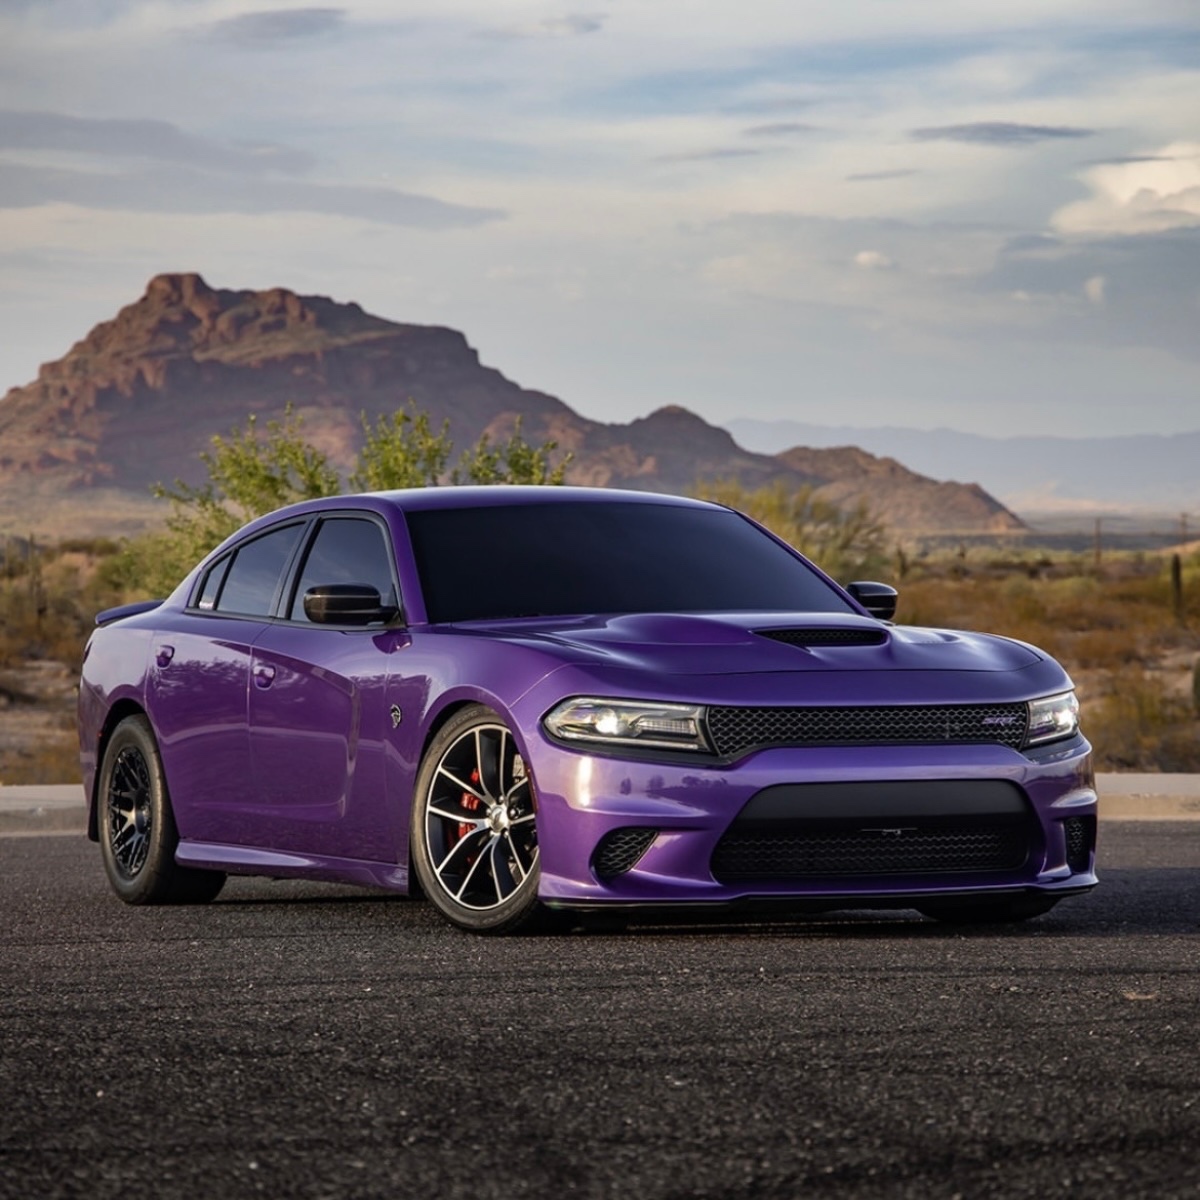 Feel the power and embrace the style of an exhilarating #DodgeCharger when you visit us today! 😈 Your sleek new ride is waiting for you, so hurry in! 🏃🏁 #CarCrushWednesday #Dodge #DodgeUSA
.
📸: purplelynx707 & garrettg.media